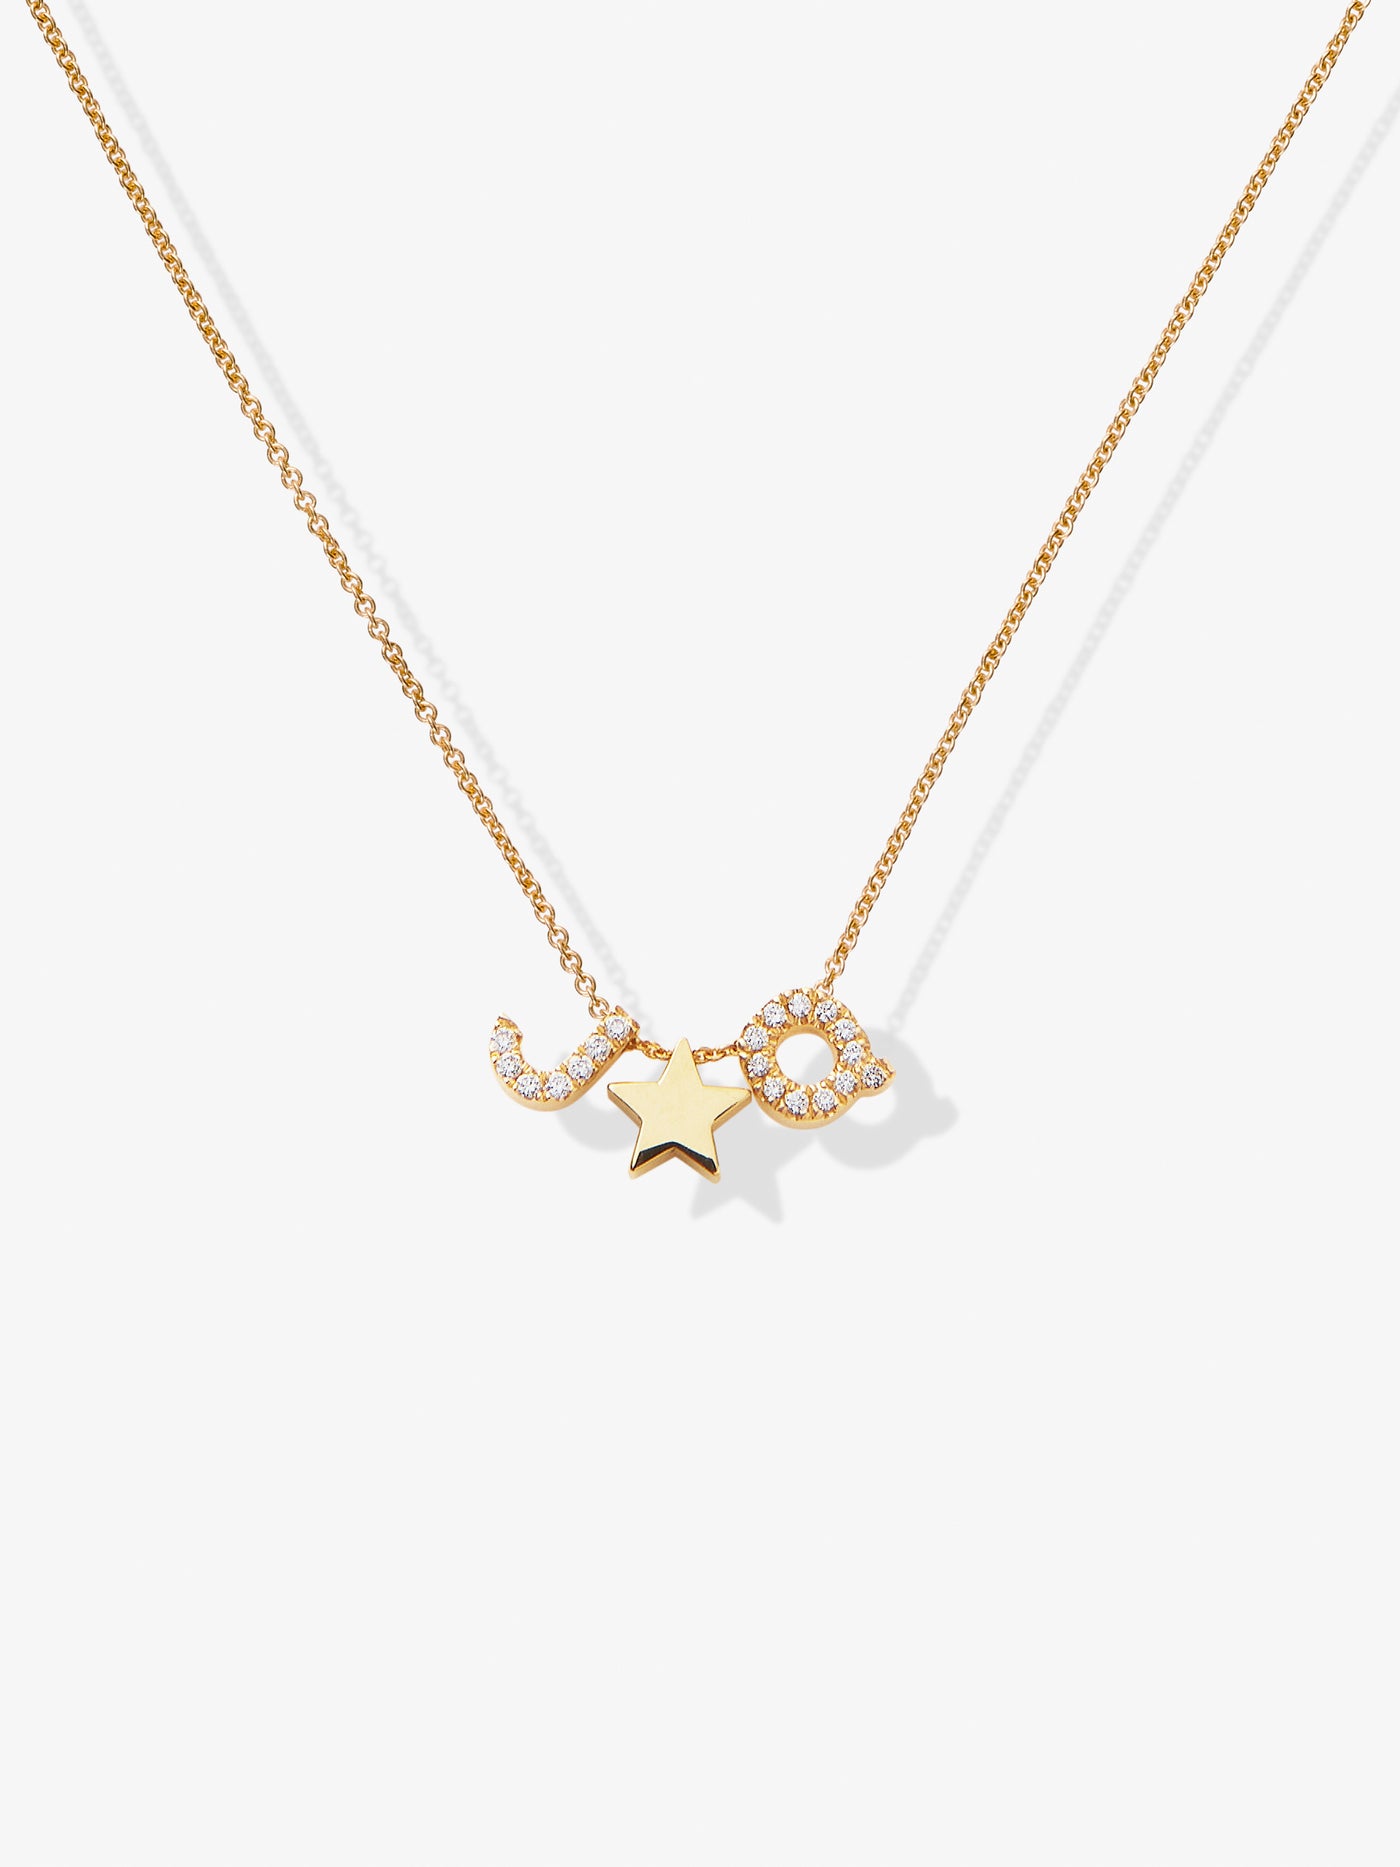 Two Letters and Star Necklace in Diamonds and 18k Gold